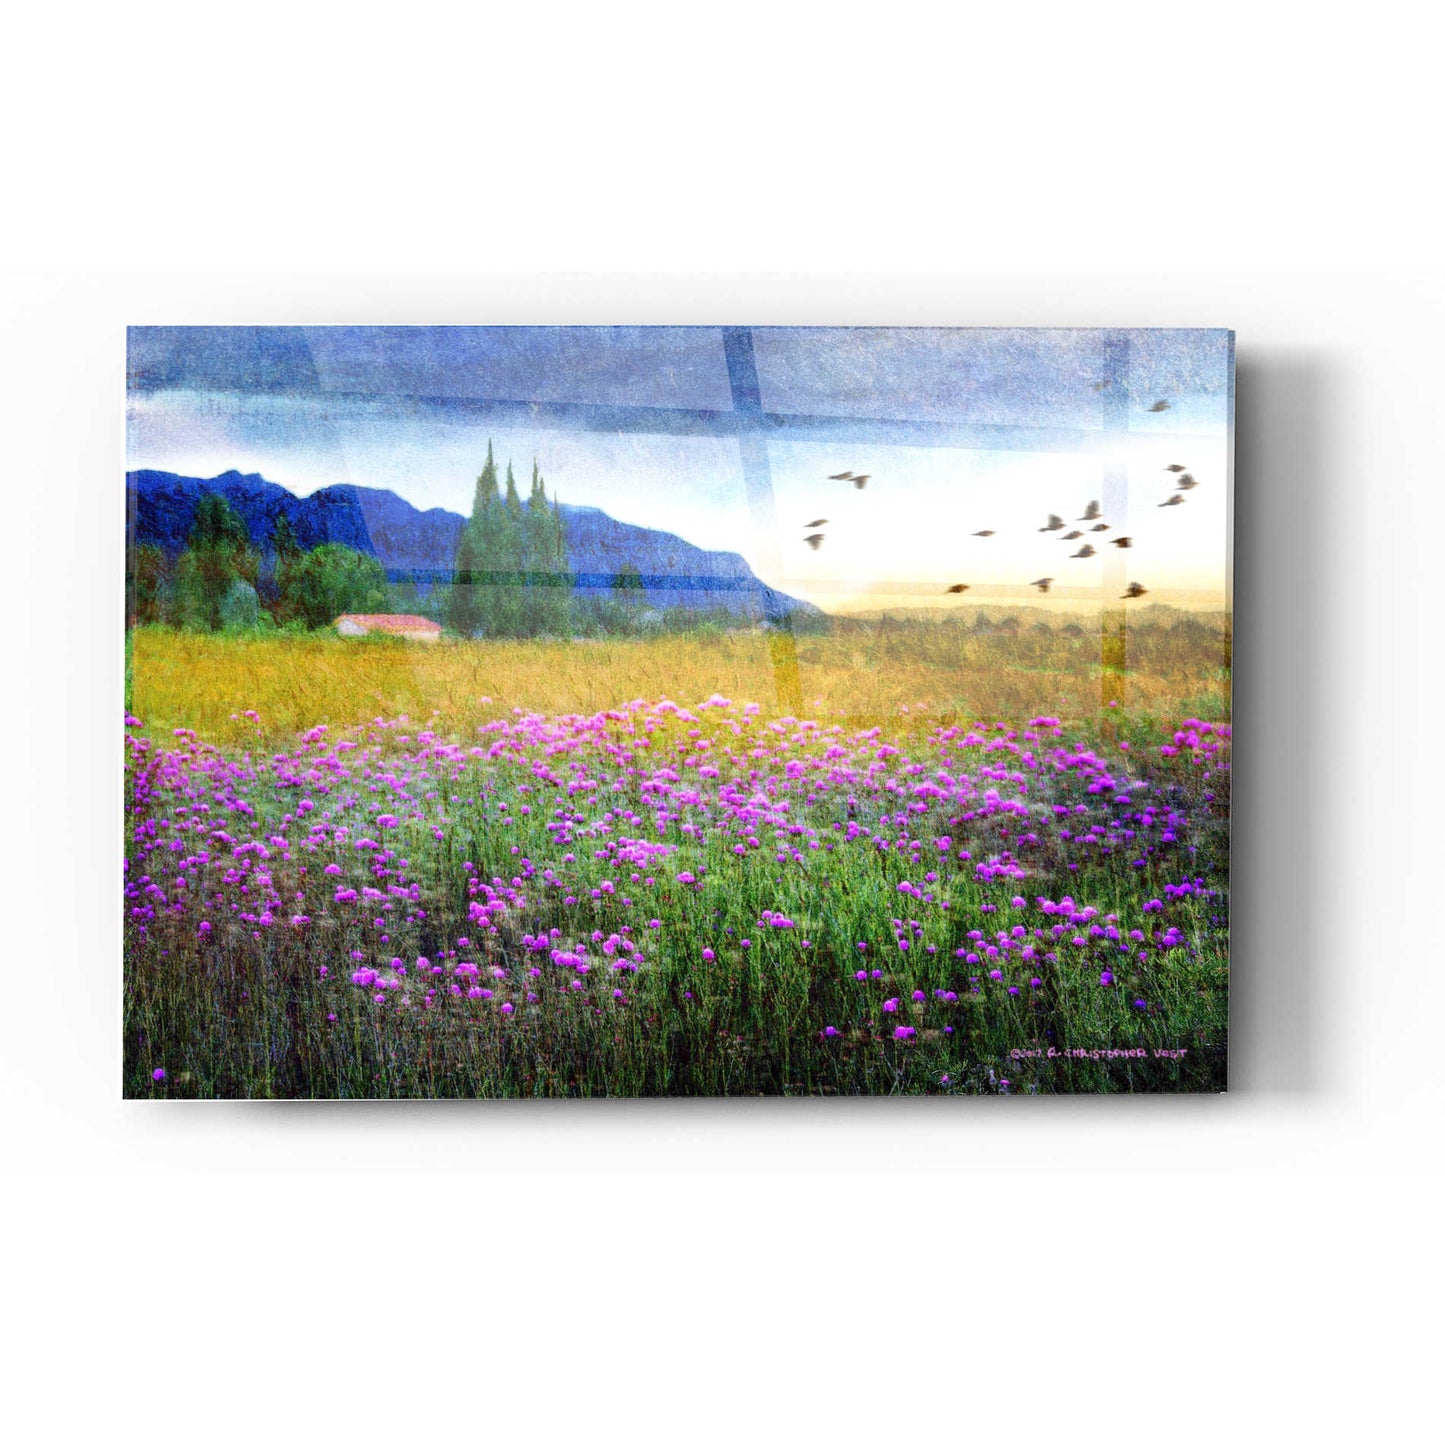 Epic Art 'Mesa Verde and Knapweed' by Chris Vest, Acrylic Glass Wall Art